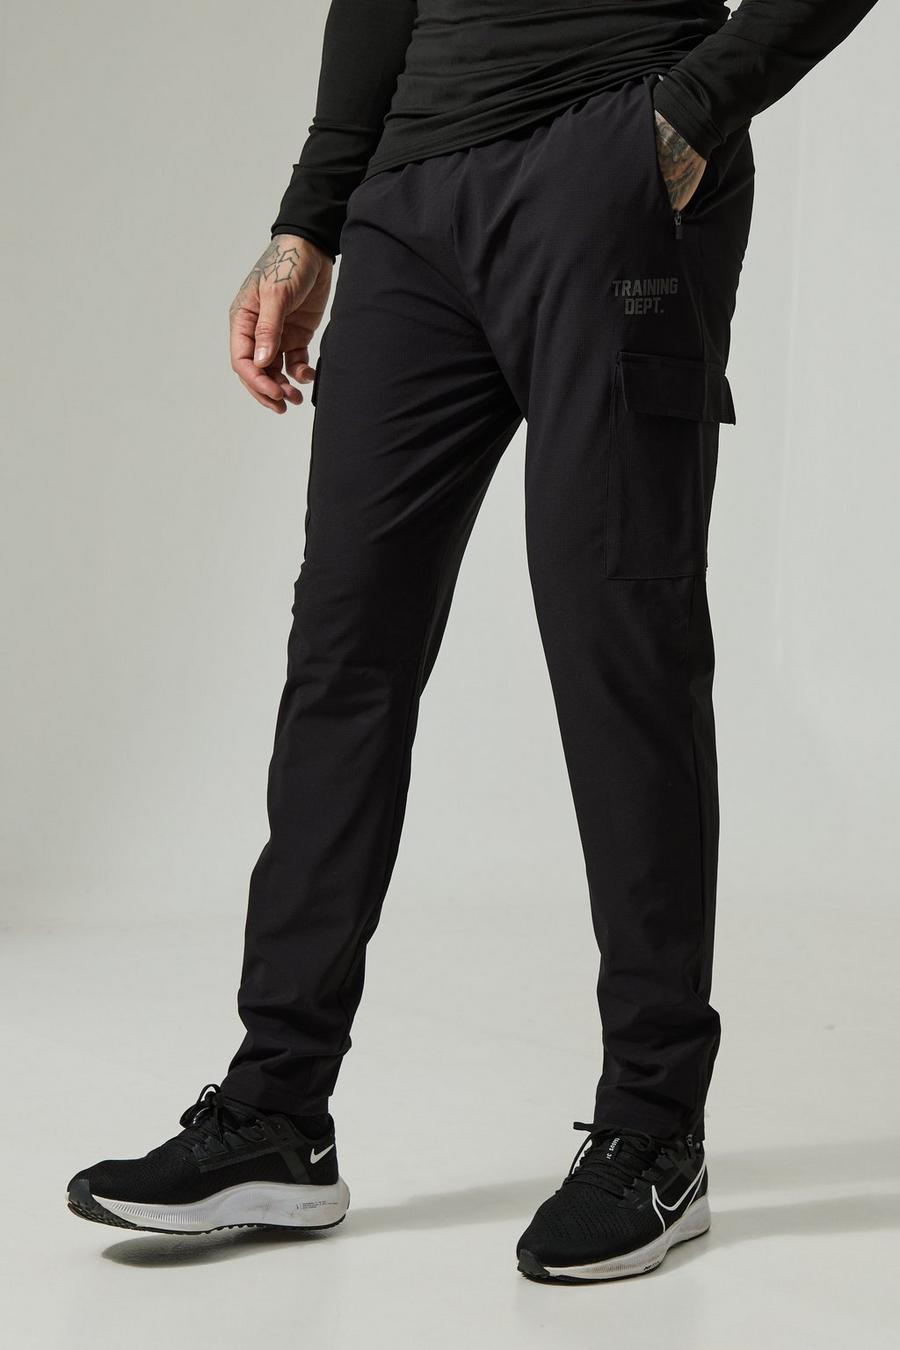 Black Tall Active Training Dept Tapered Cargo Sweatpants